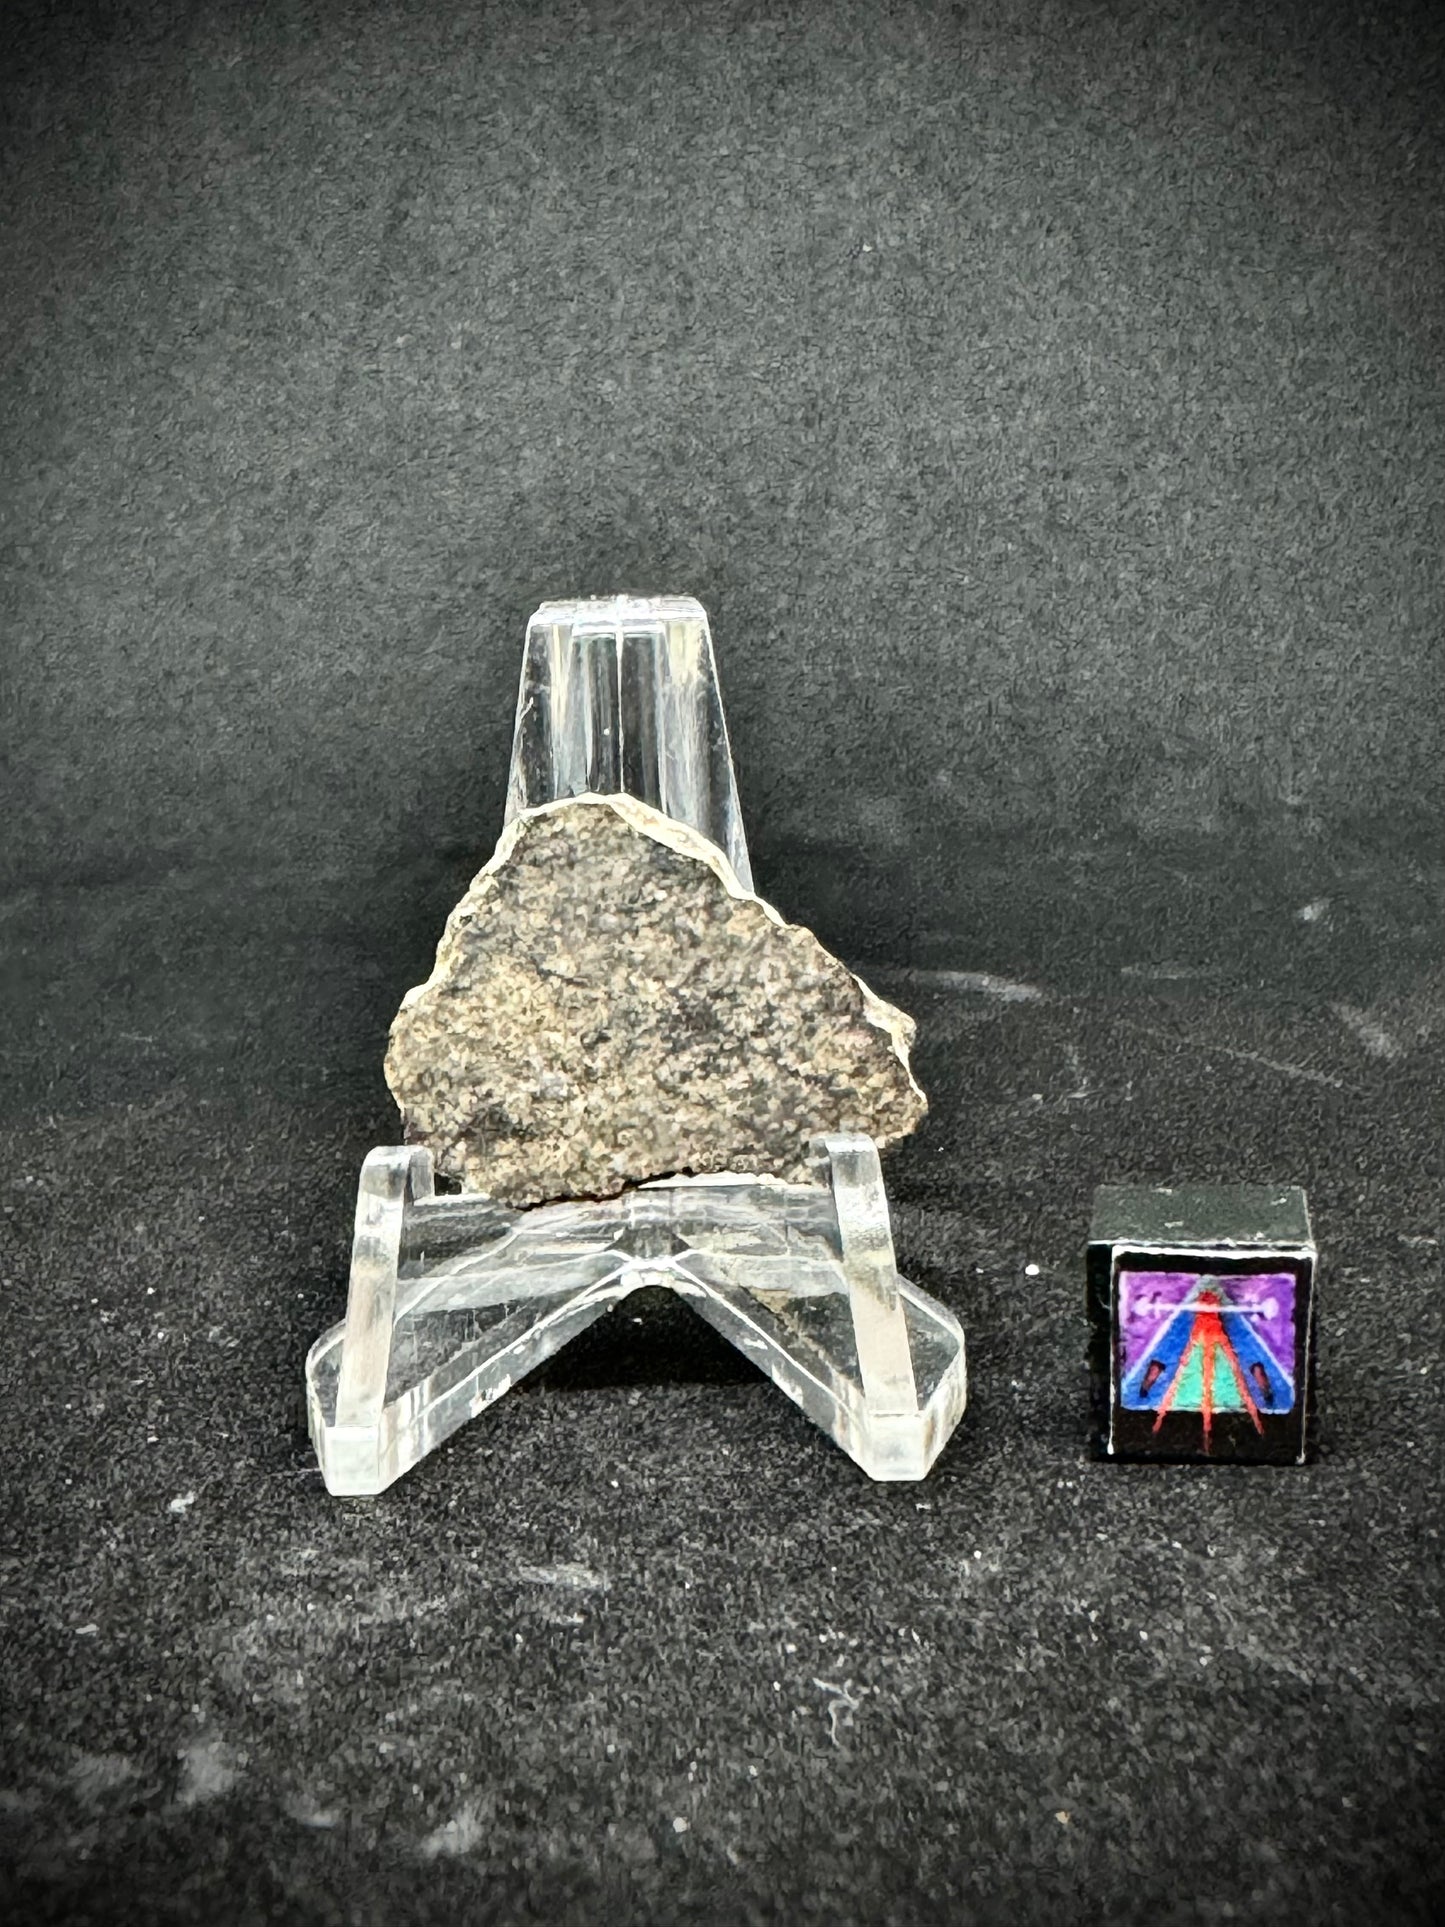 NWA 14526 Lunar Mare Basalt - An Ultra Rare Meteorite From Deep Within Our Moon! 1.8g